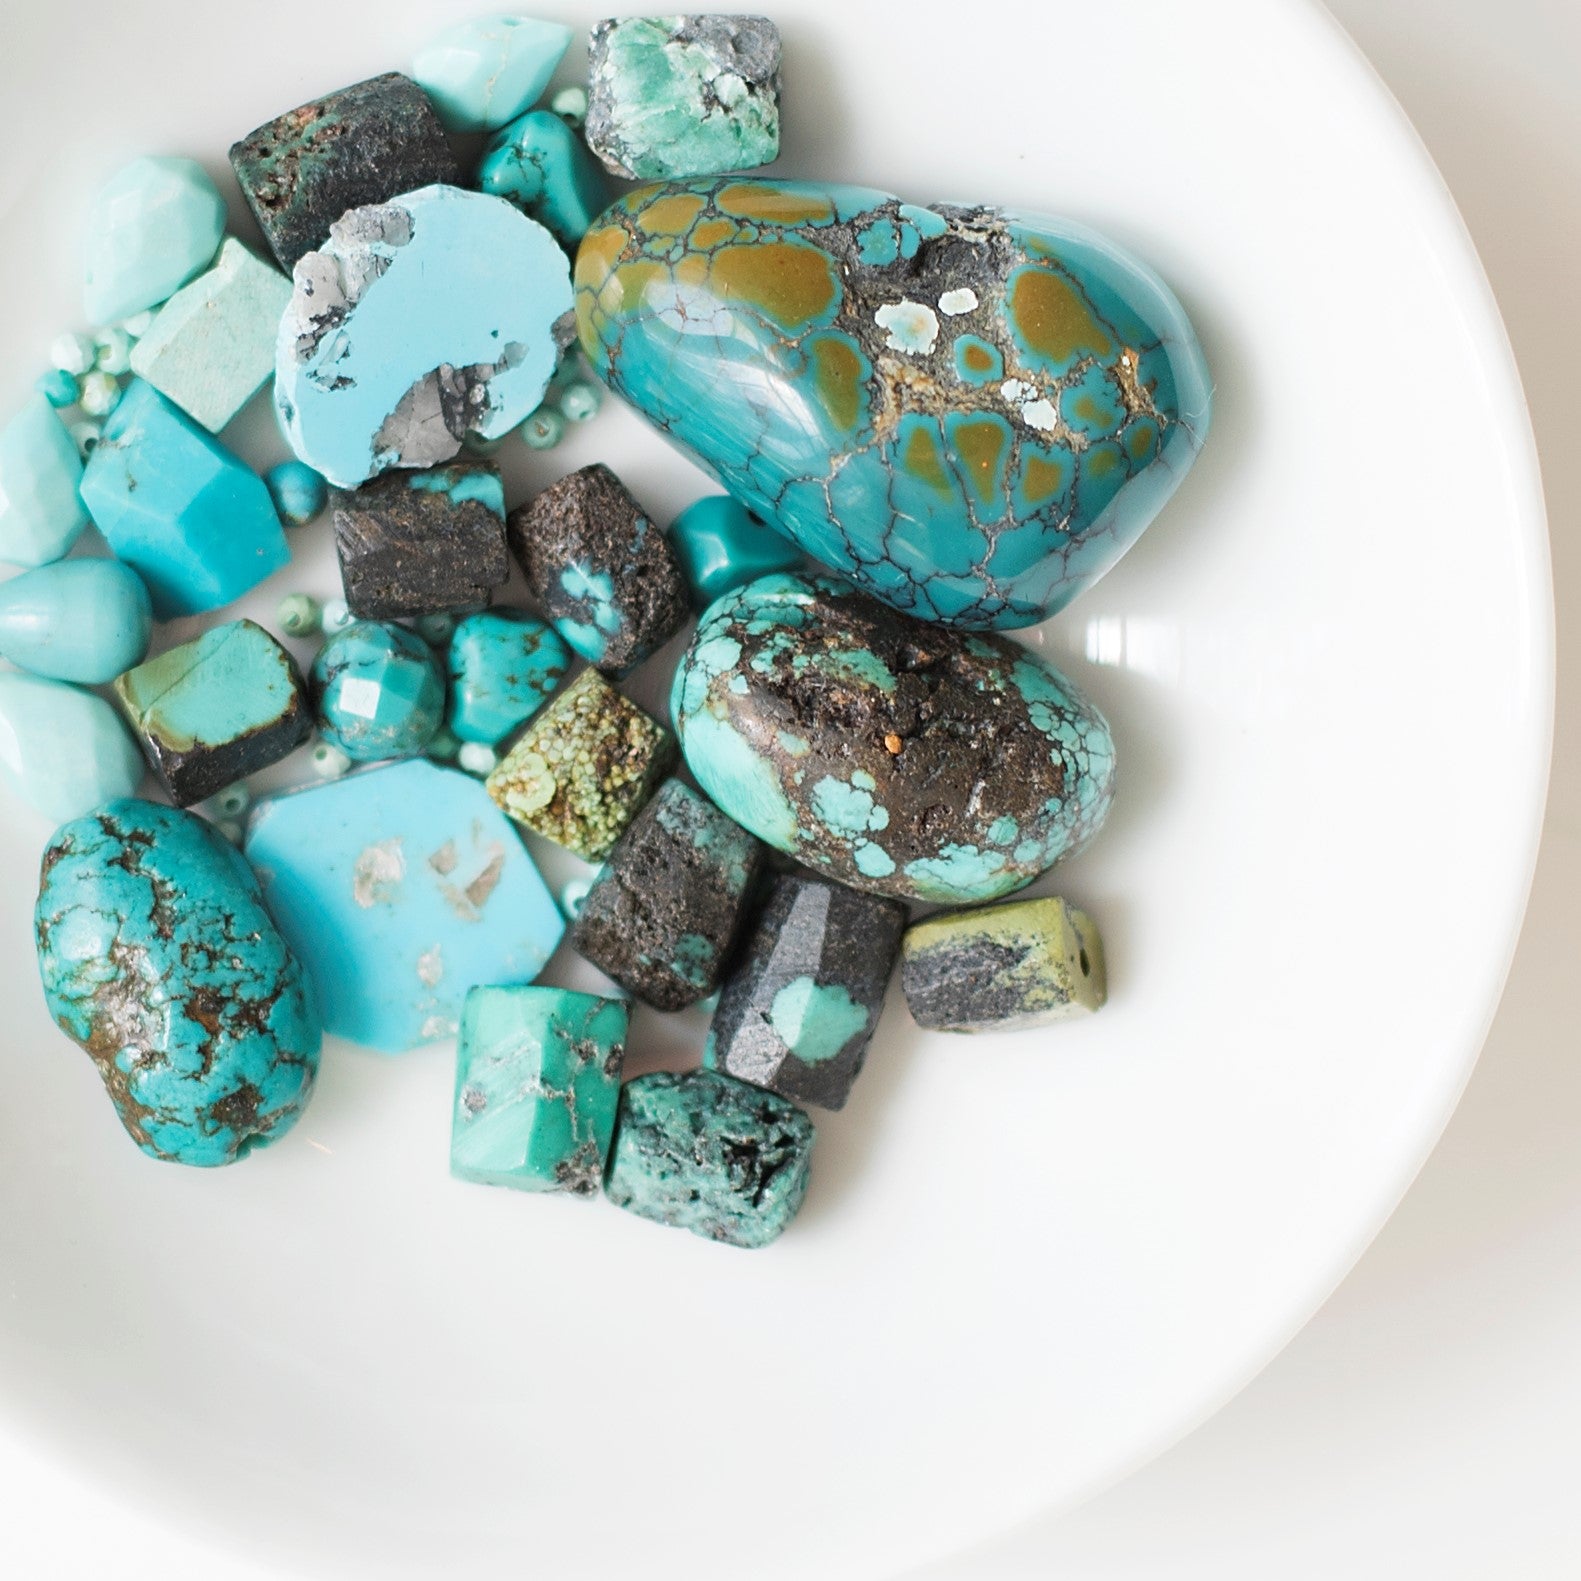 Turquoise Treasured by virtually every ancient culture, turquoise remains highly sought after for its vivid color, rich historical significance, and famed healing properties. Protection and luck are two qualities said to be imparted by turquoise, and many